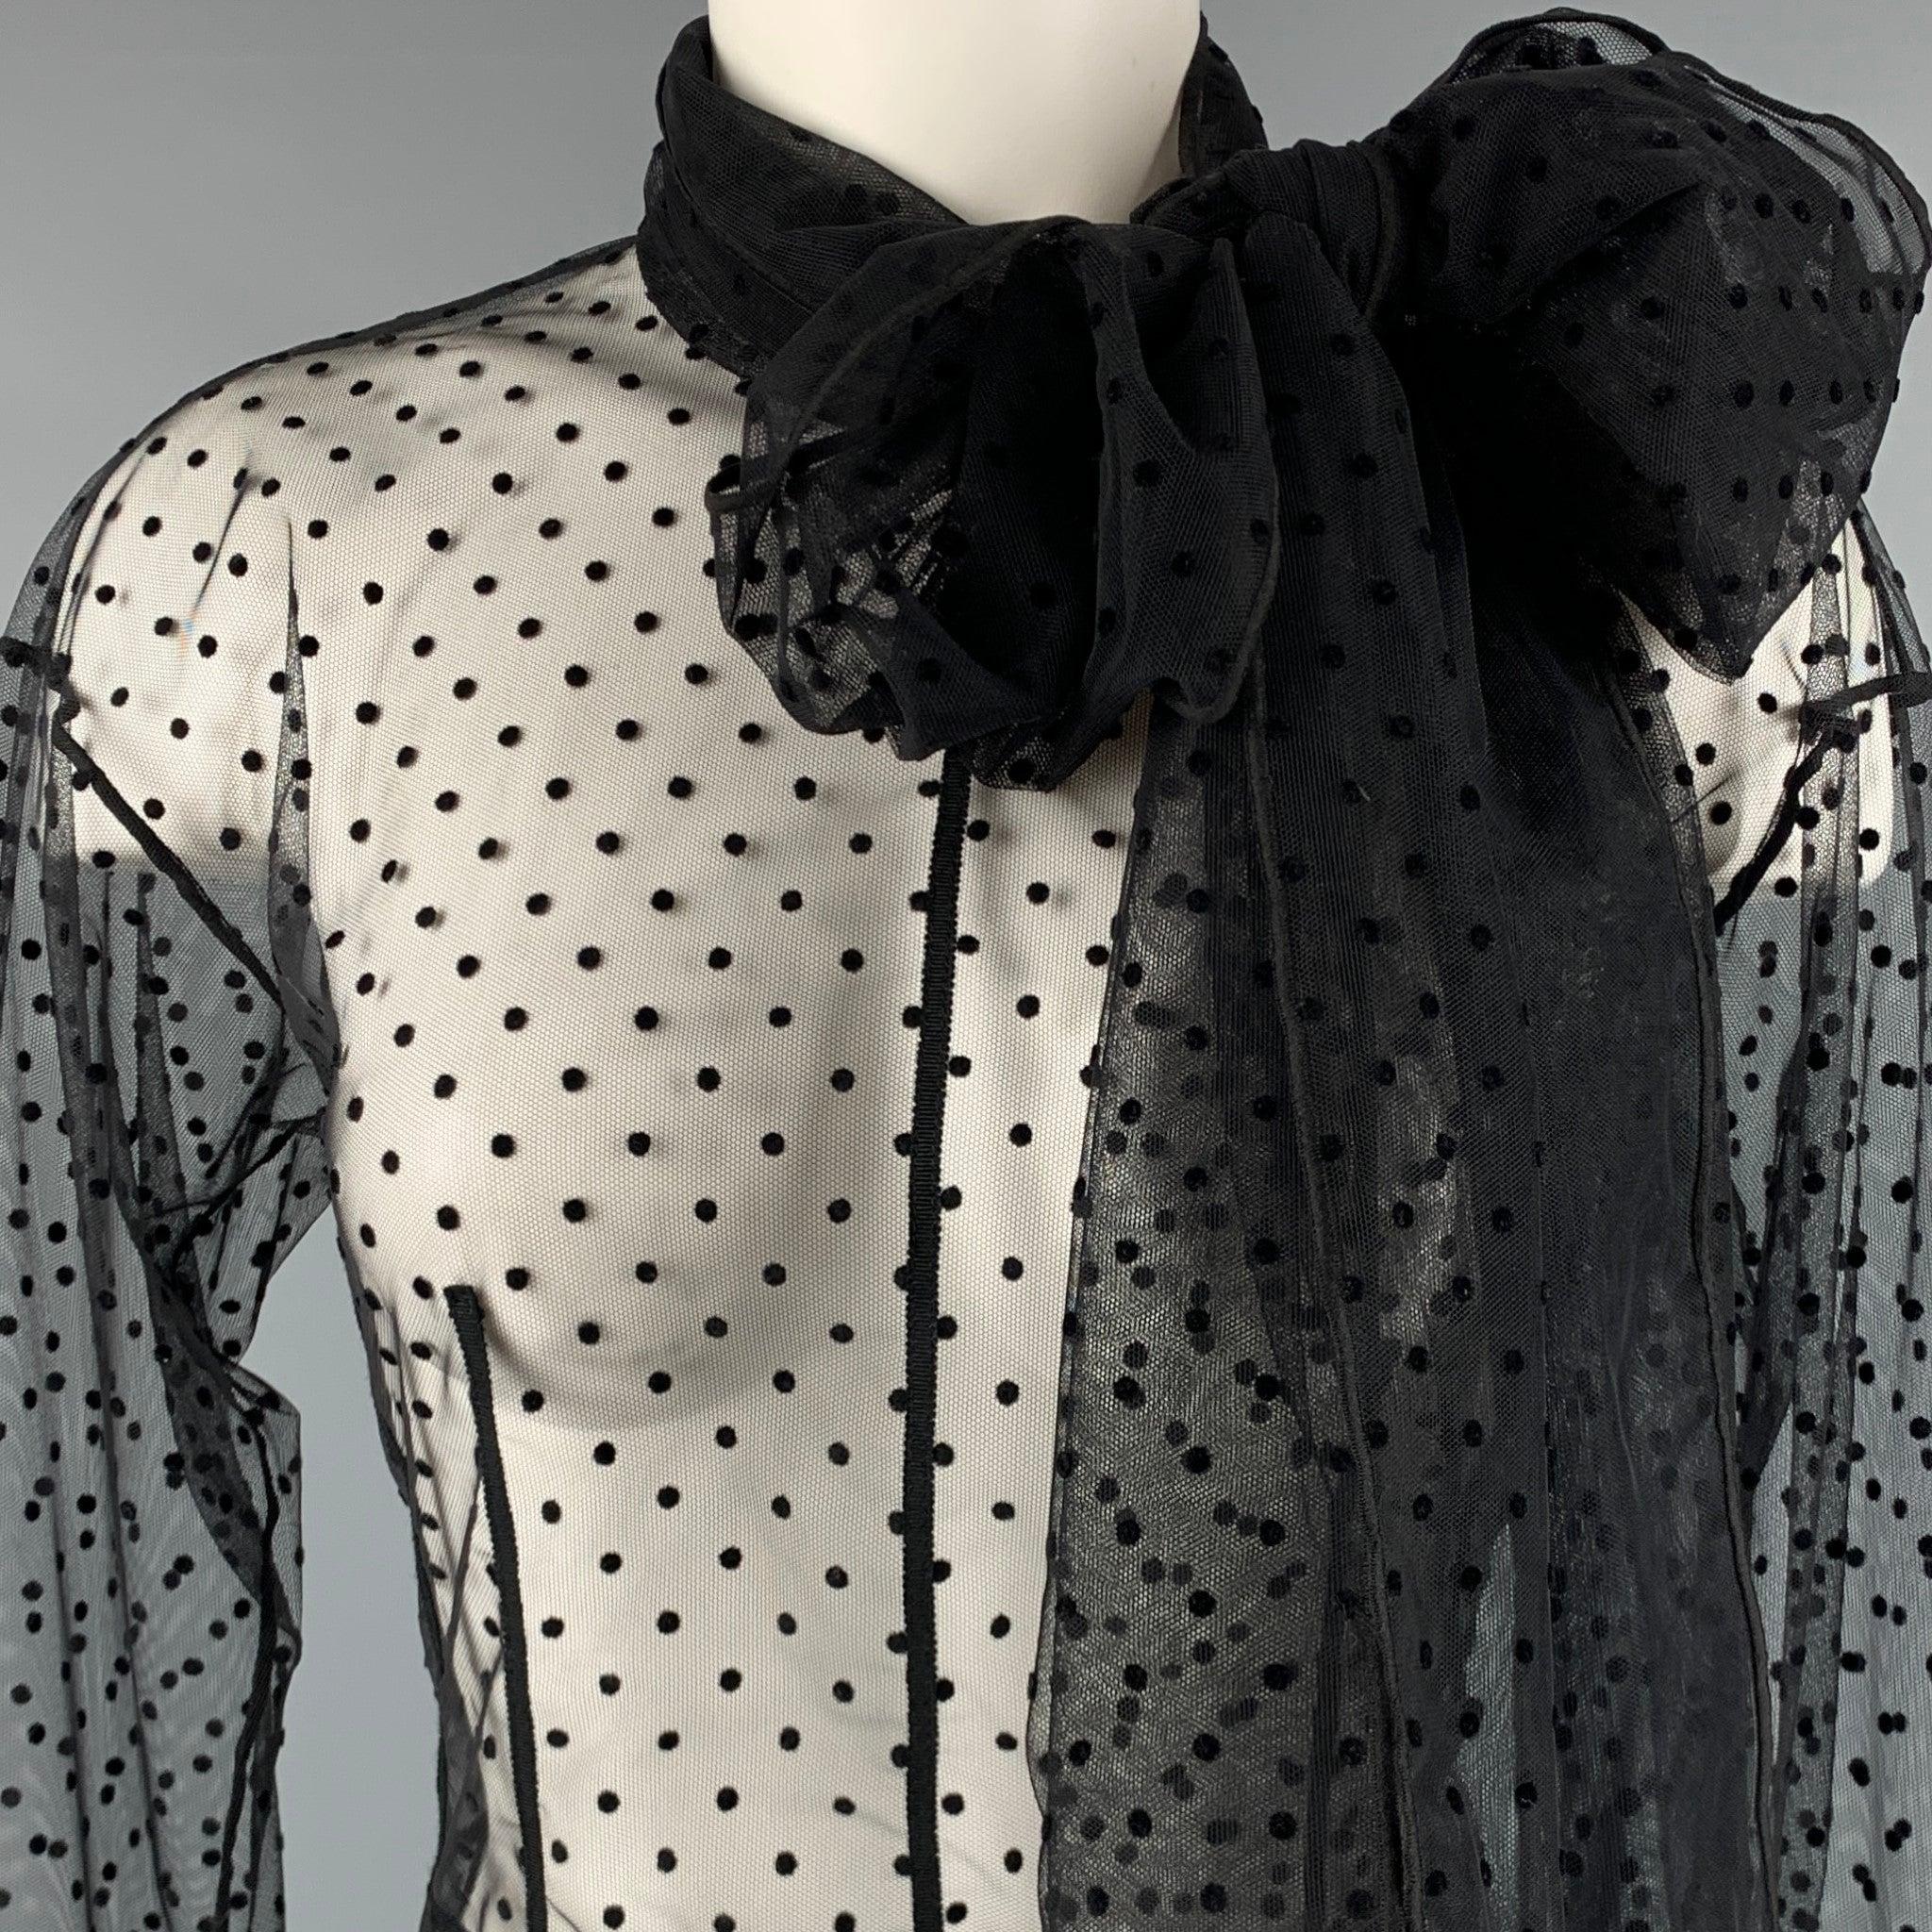 MARC JACOBS blouse
in a
black fabric featuring a sheer style, black dots pattern, large pussy bow, and back zipper closure. Excellent Pre-Owned Condition. Care and fabric tags have been removed. 

Marked:   2 

Measurements: 
 
Shoulder: 18.5 inches